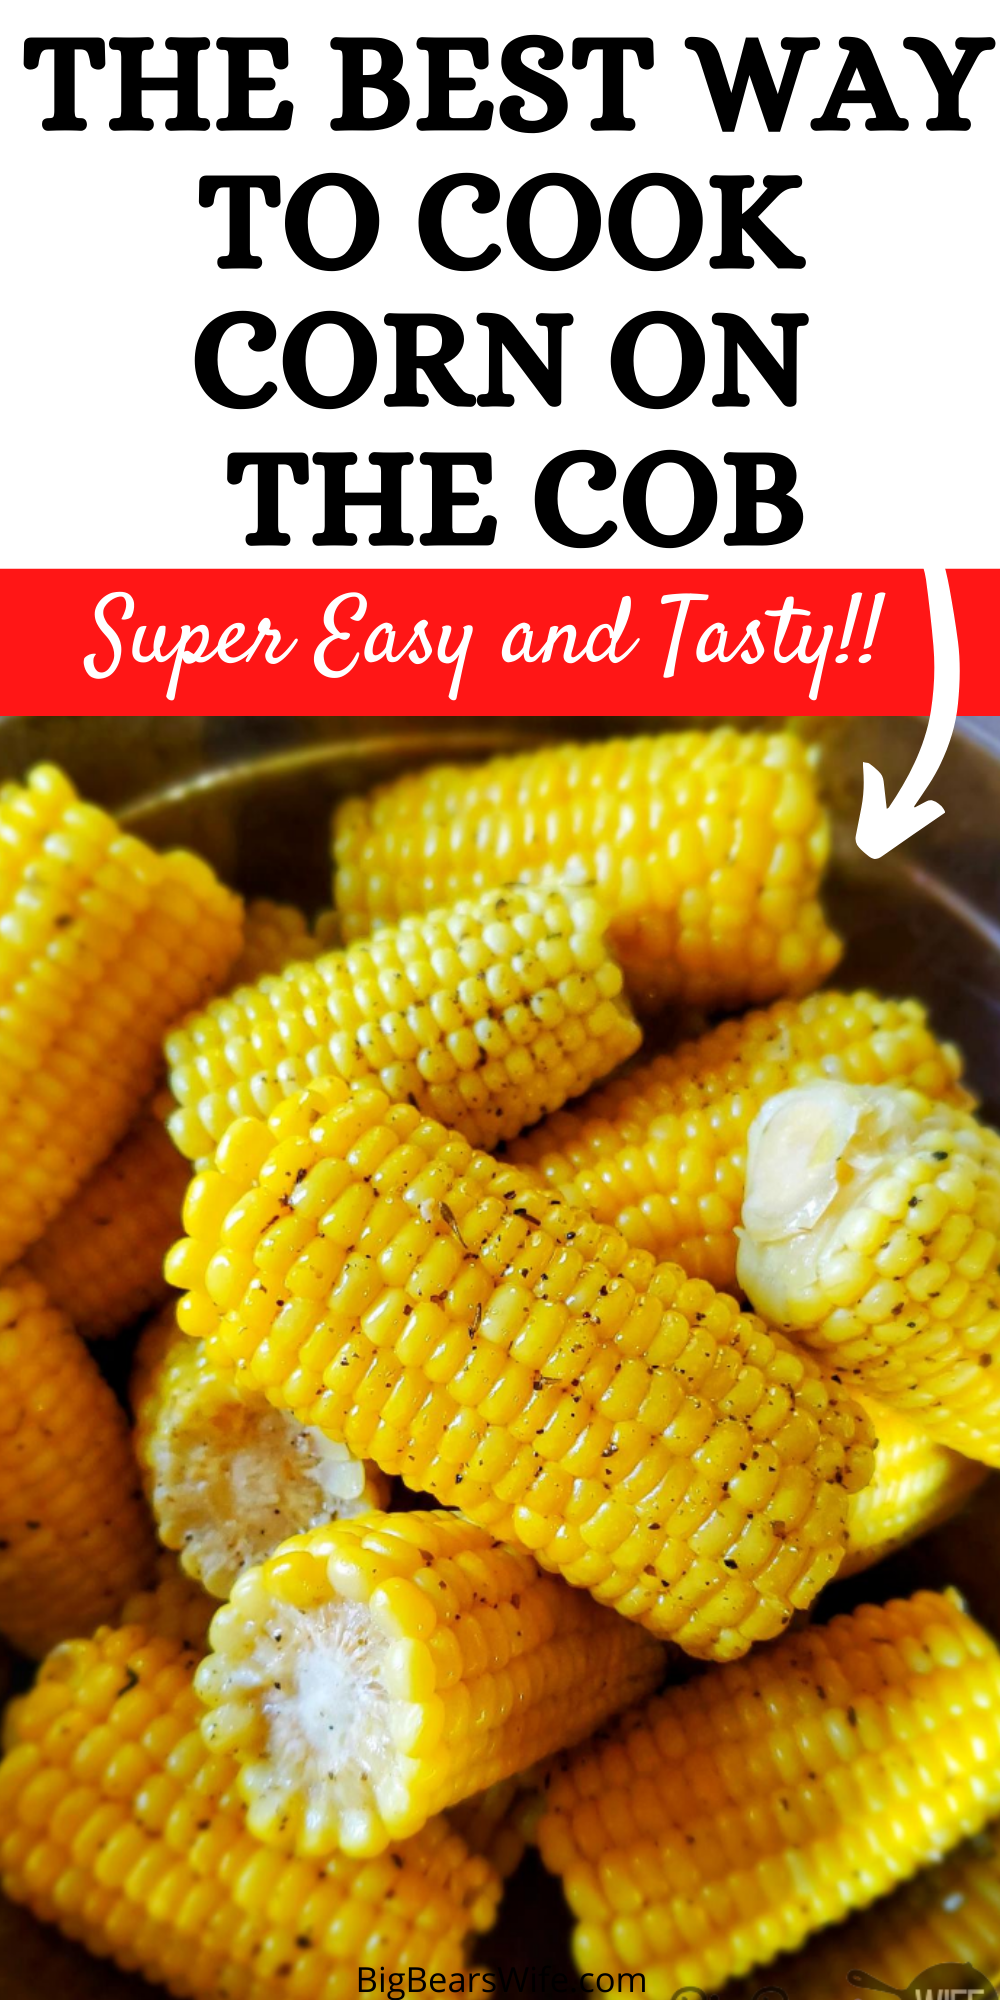 Making Milk Butter Corn on the Cob by boiling corn on the cob in a mix of milk and butter makes some of the most delicious corn on the cob. Boiling corn on the cob in Milk and Butter is the best way to cook corn on the cob! via @bigbearswife